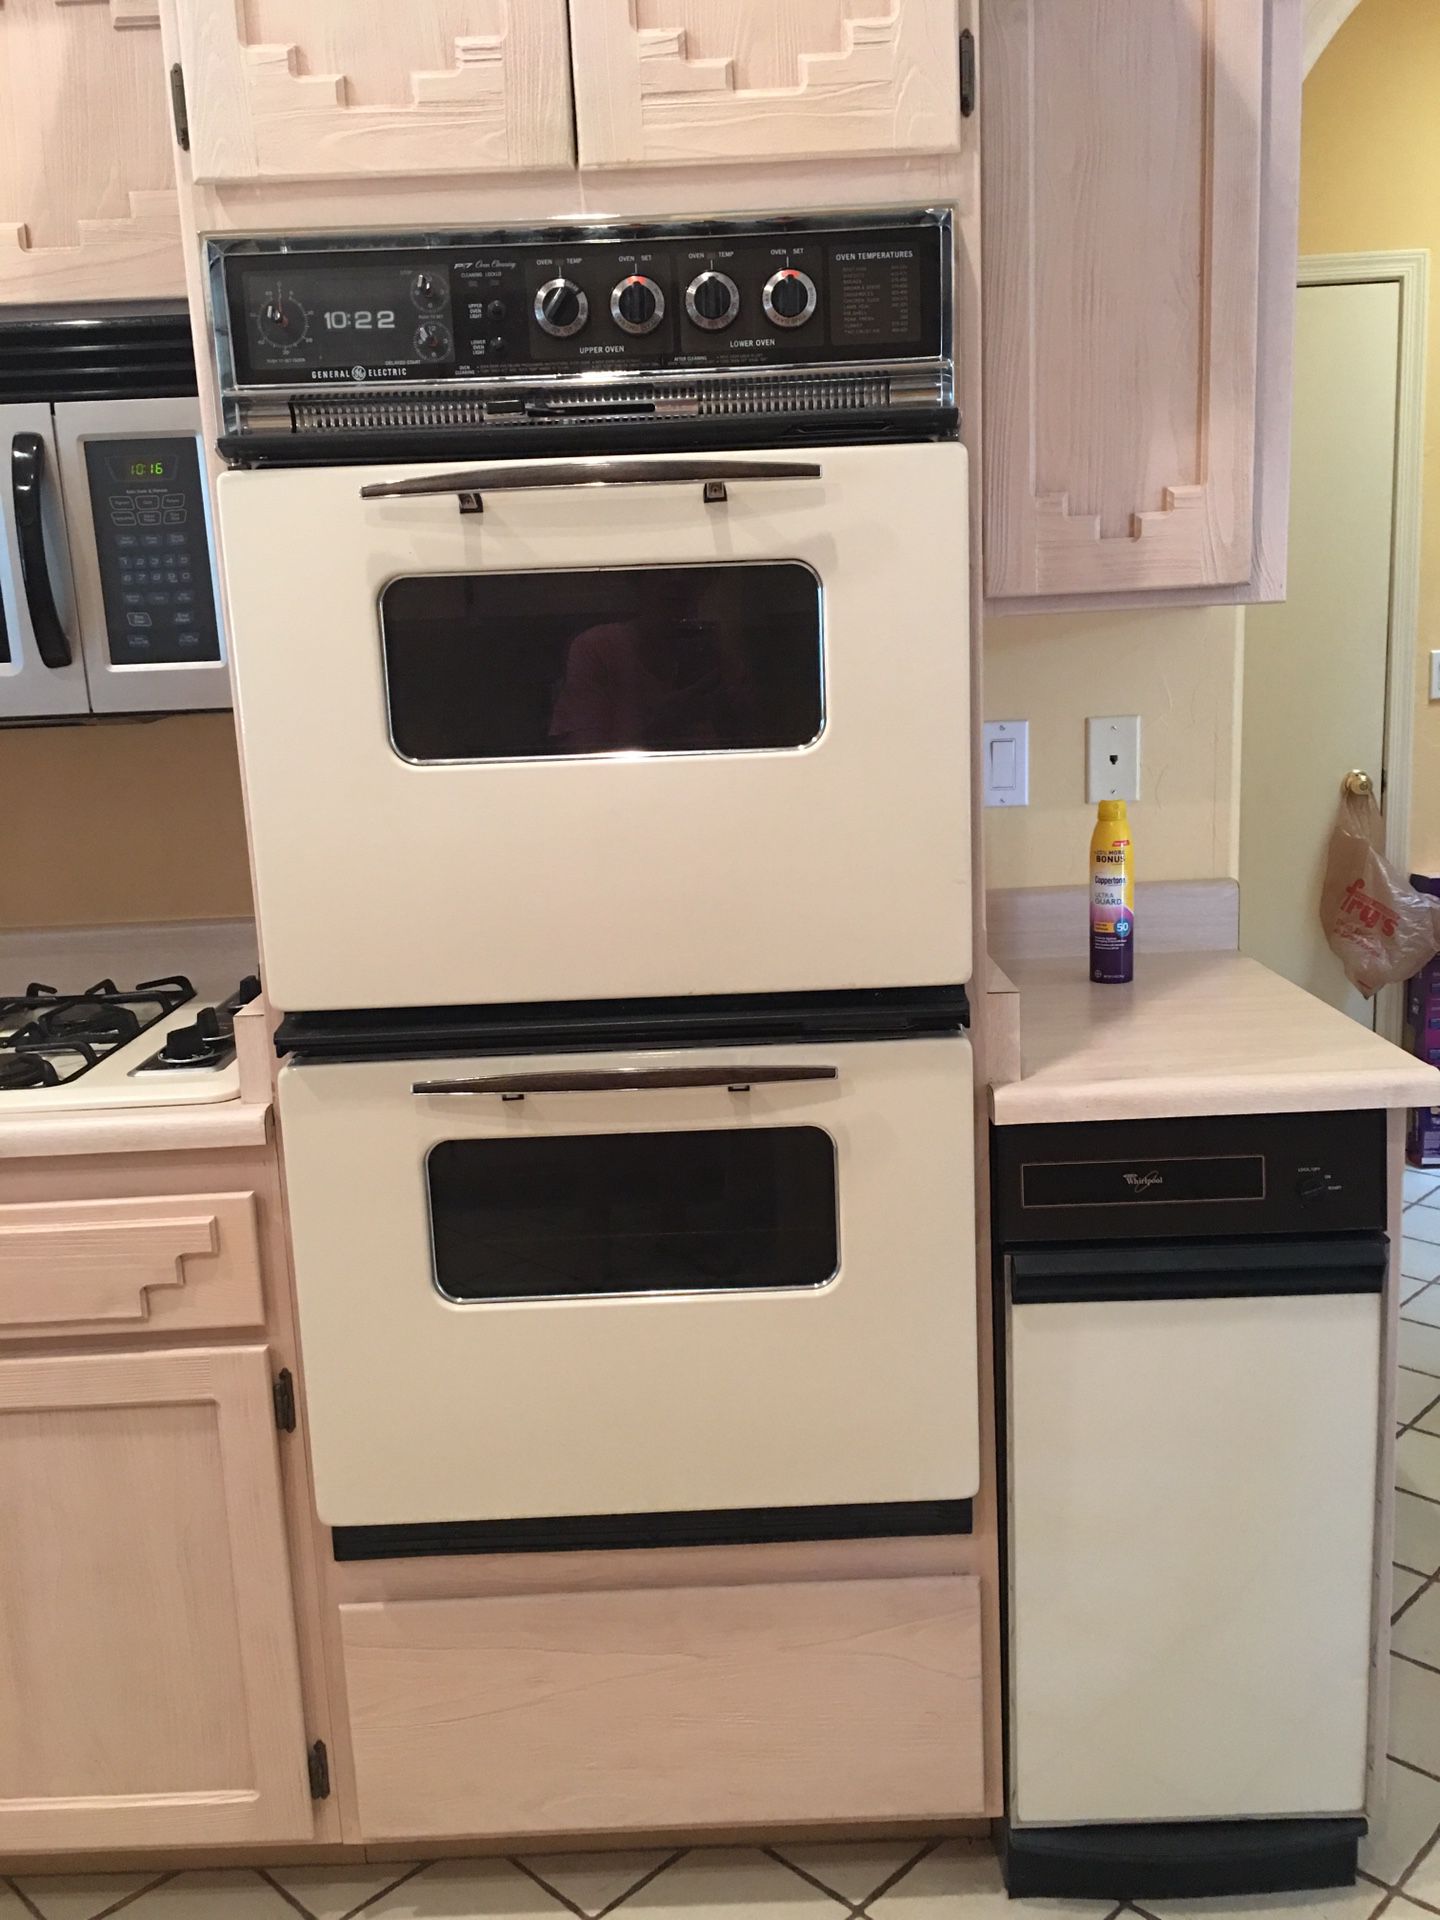 GE double oven, magic chef has cook top, Whirlpool trash compactor, light beige